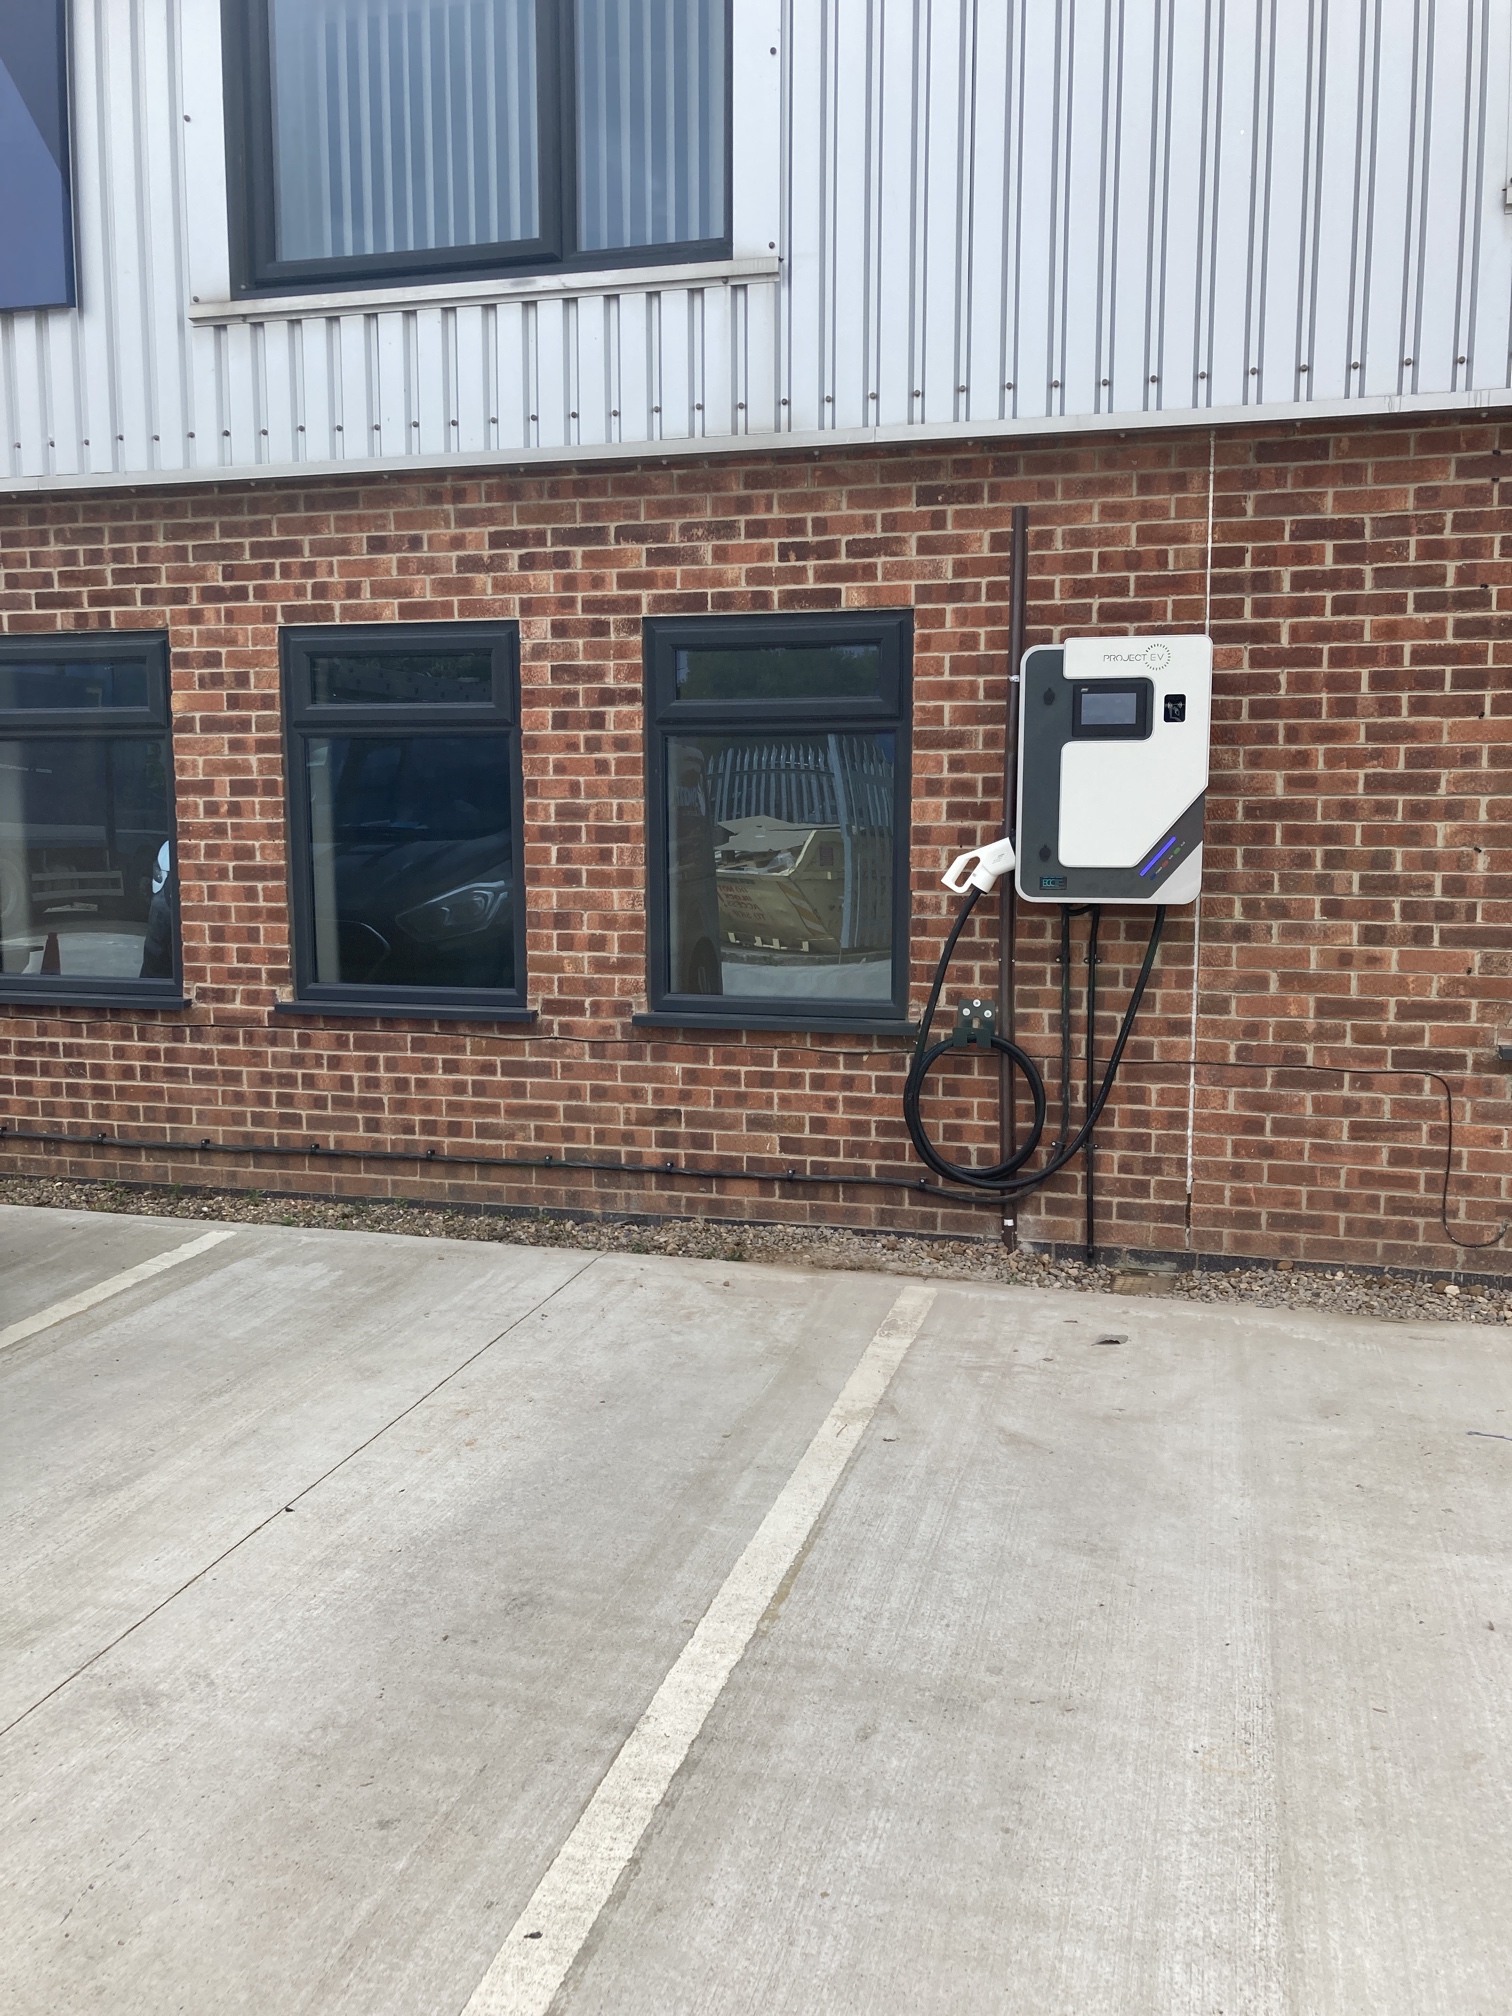 Electric-Car-Chargers-UK-Ltd-ECC-UK-EV-Charge-Point-Installers-OZEV-Approved-Structural-Metal